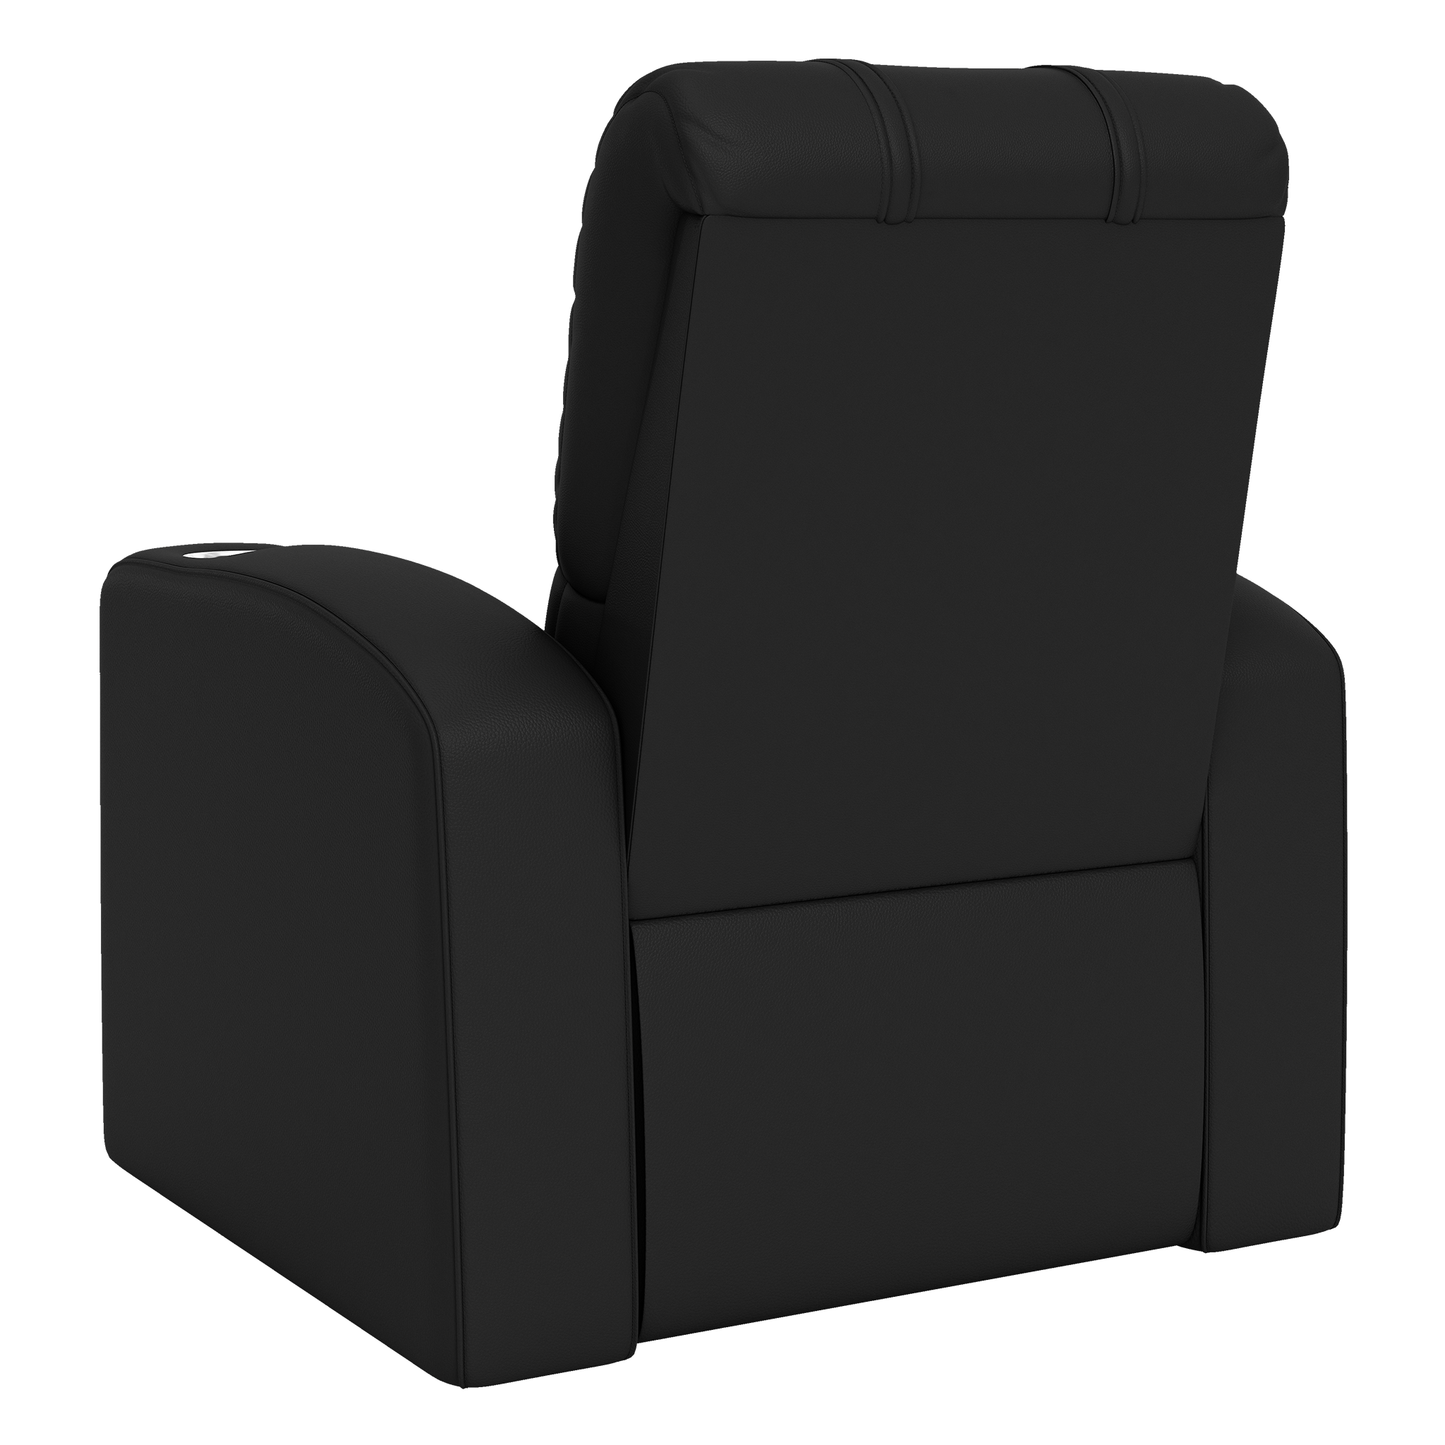 Relax Home Theater Recliner with Georgetown Hoyas Secondary